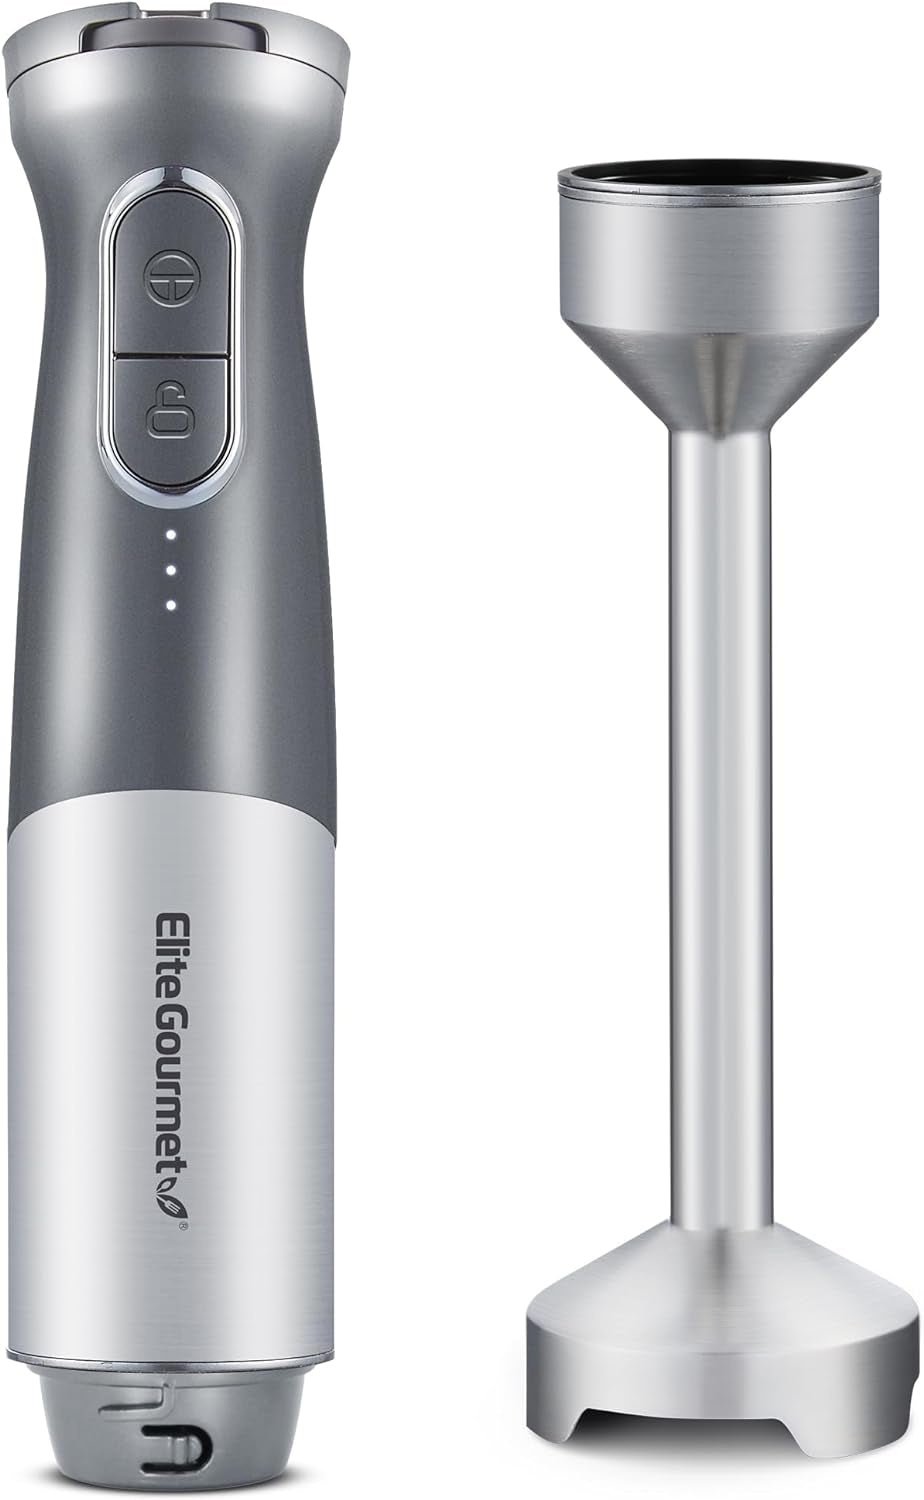 Elite Gourmet EHB1023 Immersion Hand Blender 300 Watts 2 Speed Mixing with Detachable Blades, Detachable Wand Stick Mixer, Smoothies, Baby Food, Soup, Black  Elite Gourmet Grey Immersion Blenders Cordless